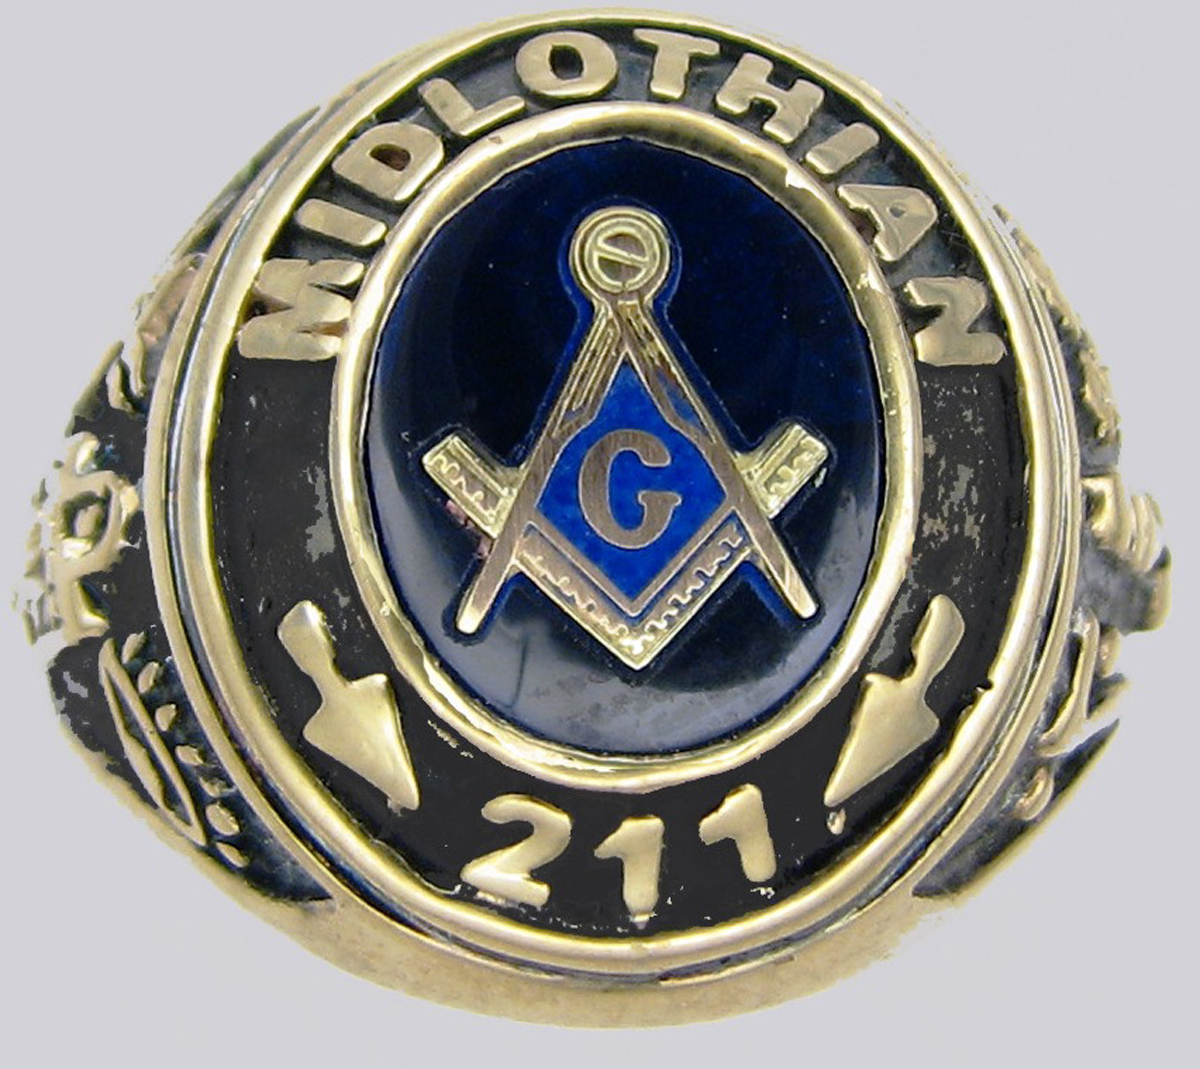 Alicejewelry 316L Stainless Steel Masonic Rings AG Lodge Freemason Ring  Gold,Size 8|Amazon.com